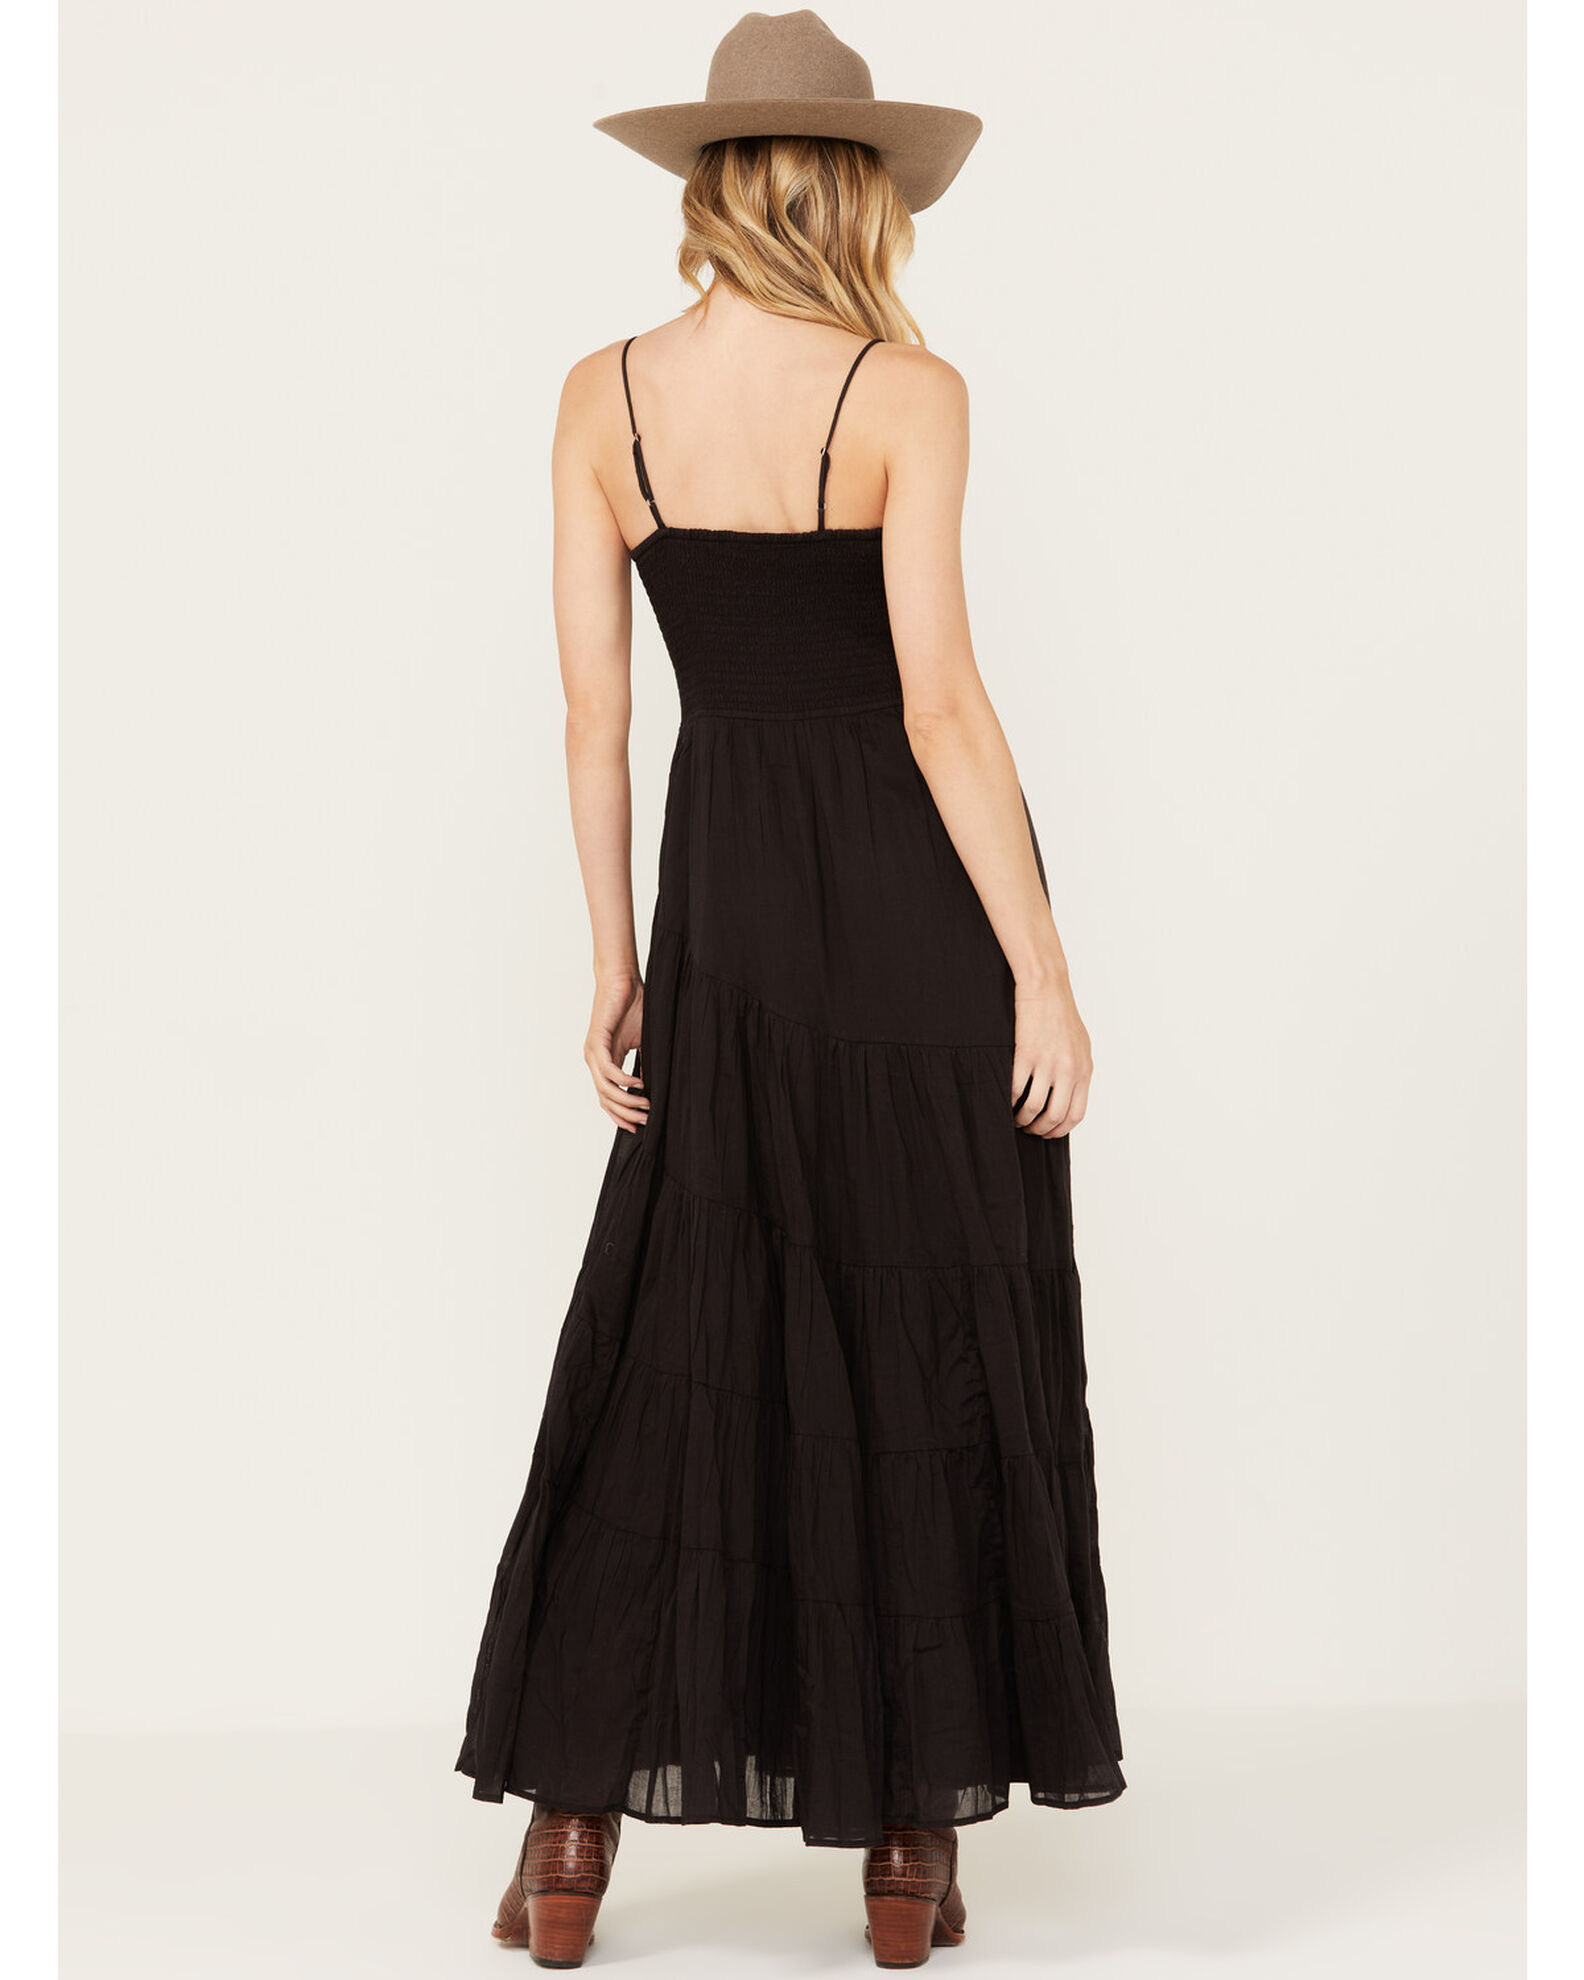 Free People Women's Sundrenched Solid Sleeveless Maxi Dress